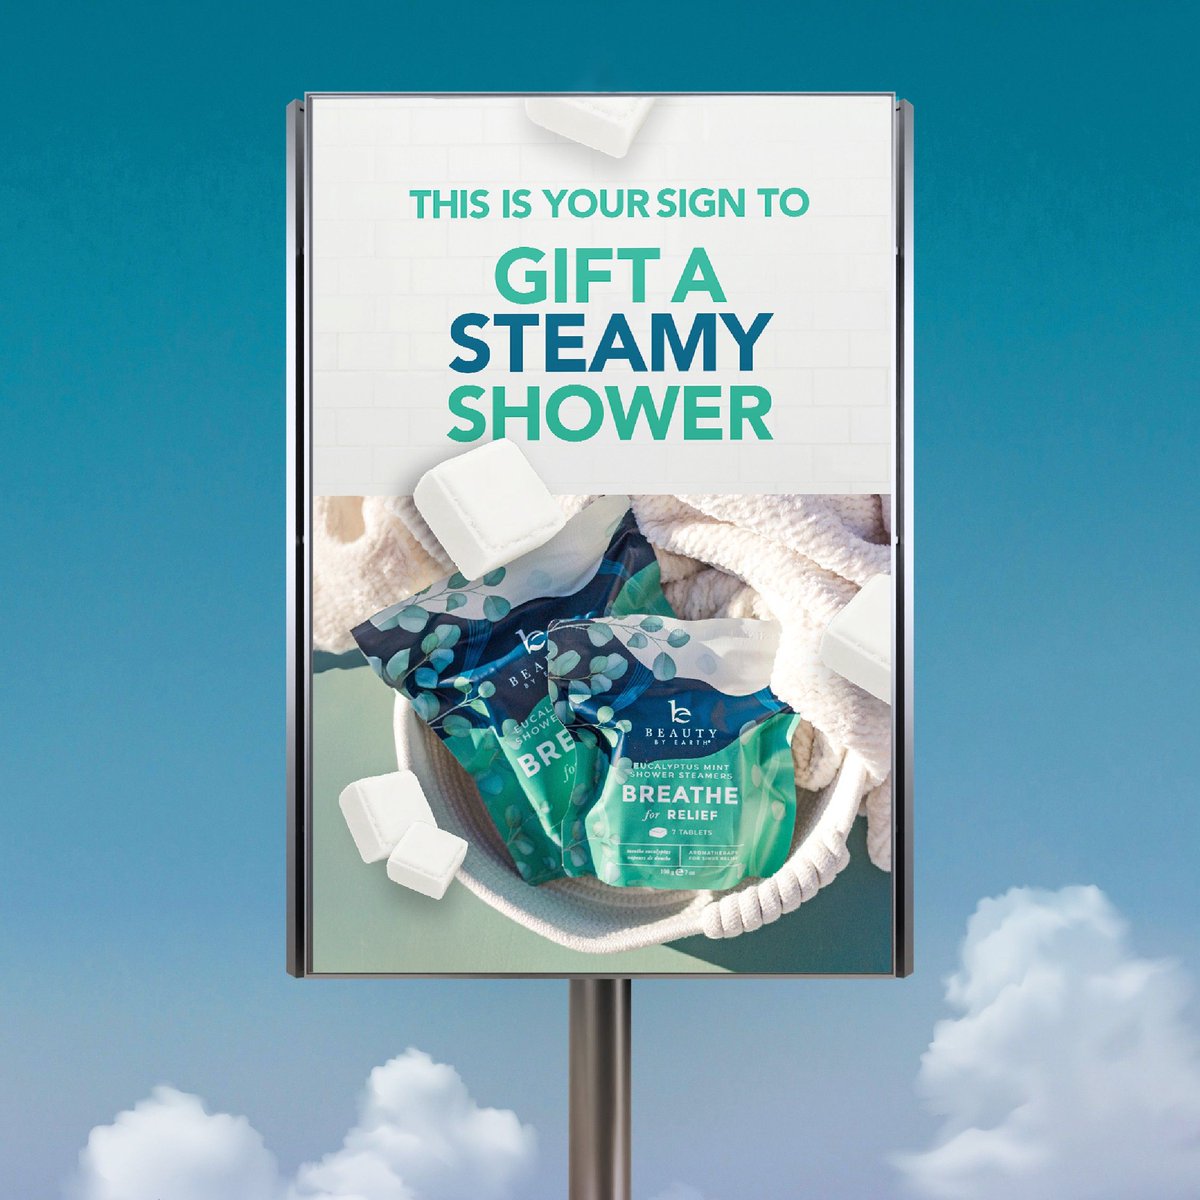 IT'S A SIGN! Gift a steamy shower. 🤩

#showersteamers #steamers #steamyshower #present #gift #giftidea #nontoxic #natural #organic #cleaningredients #cleanliving